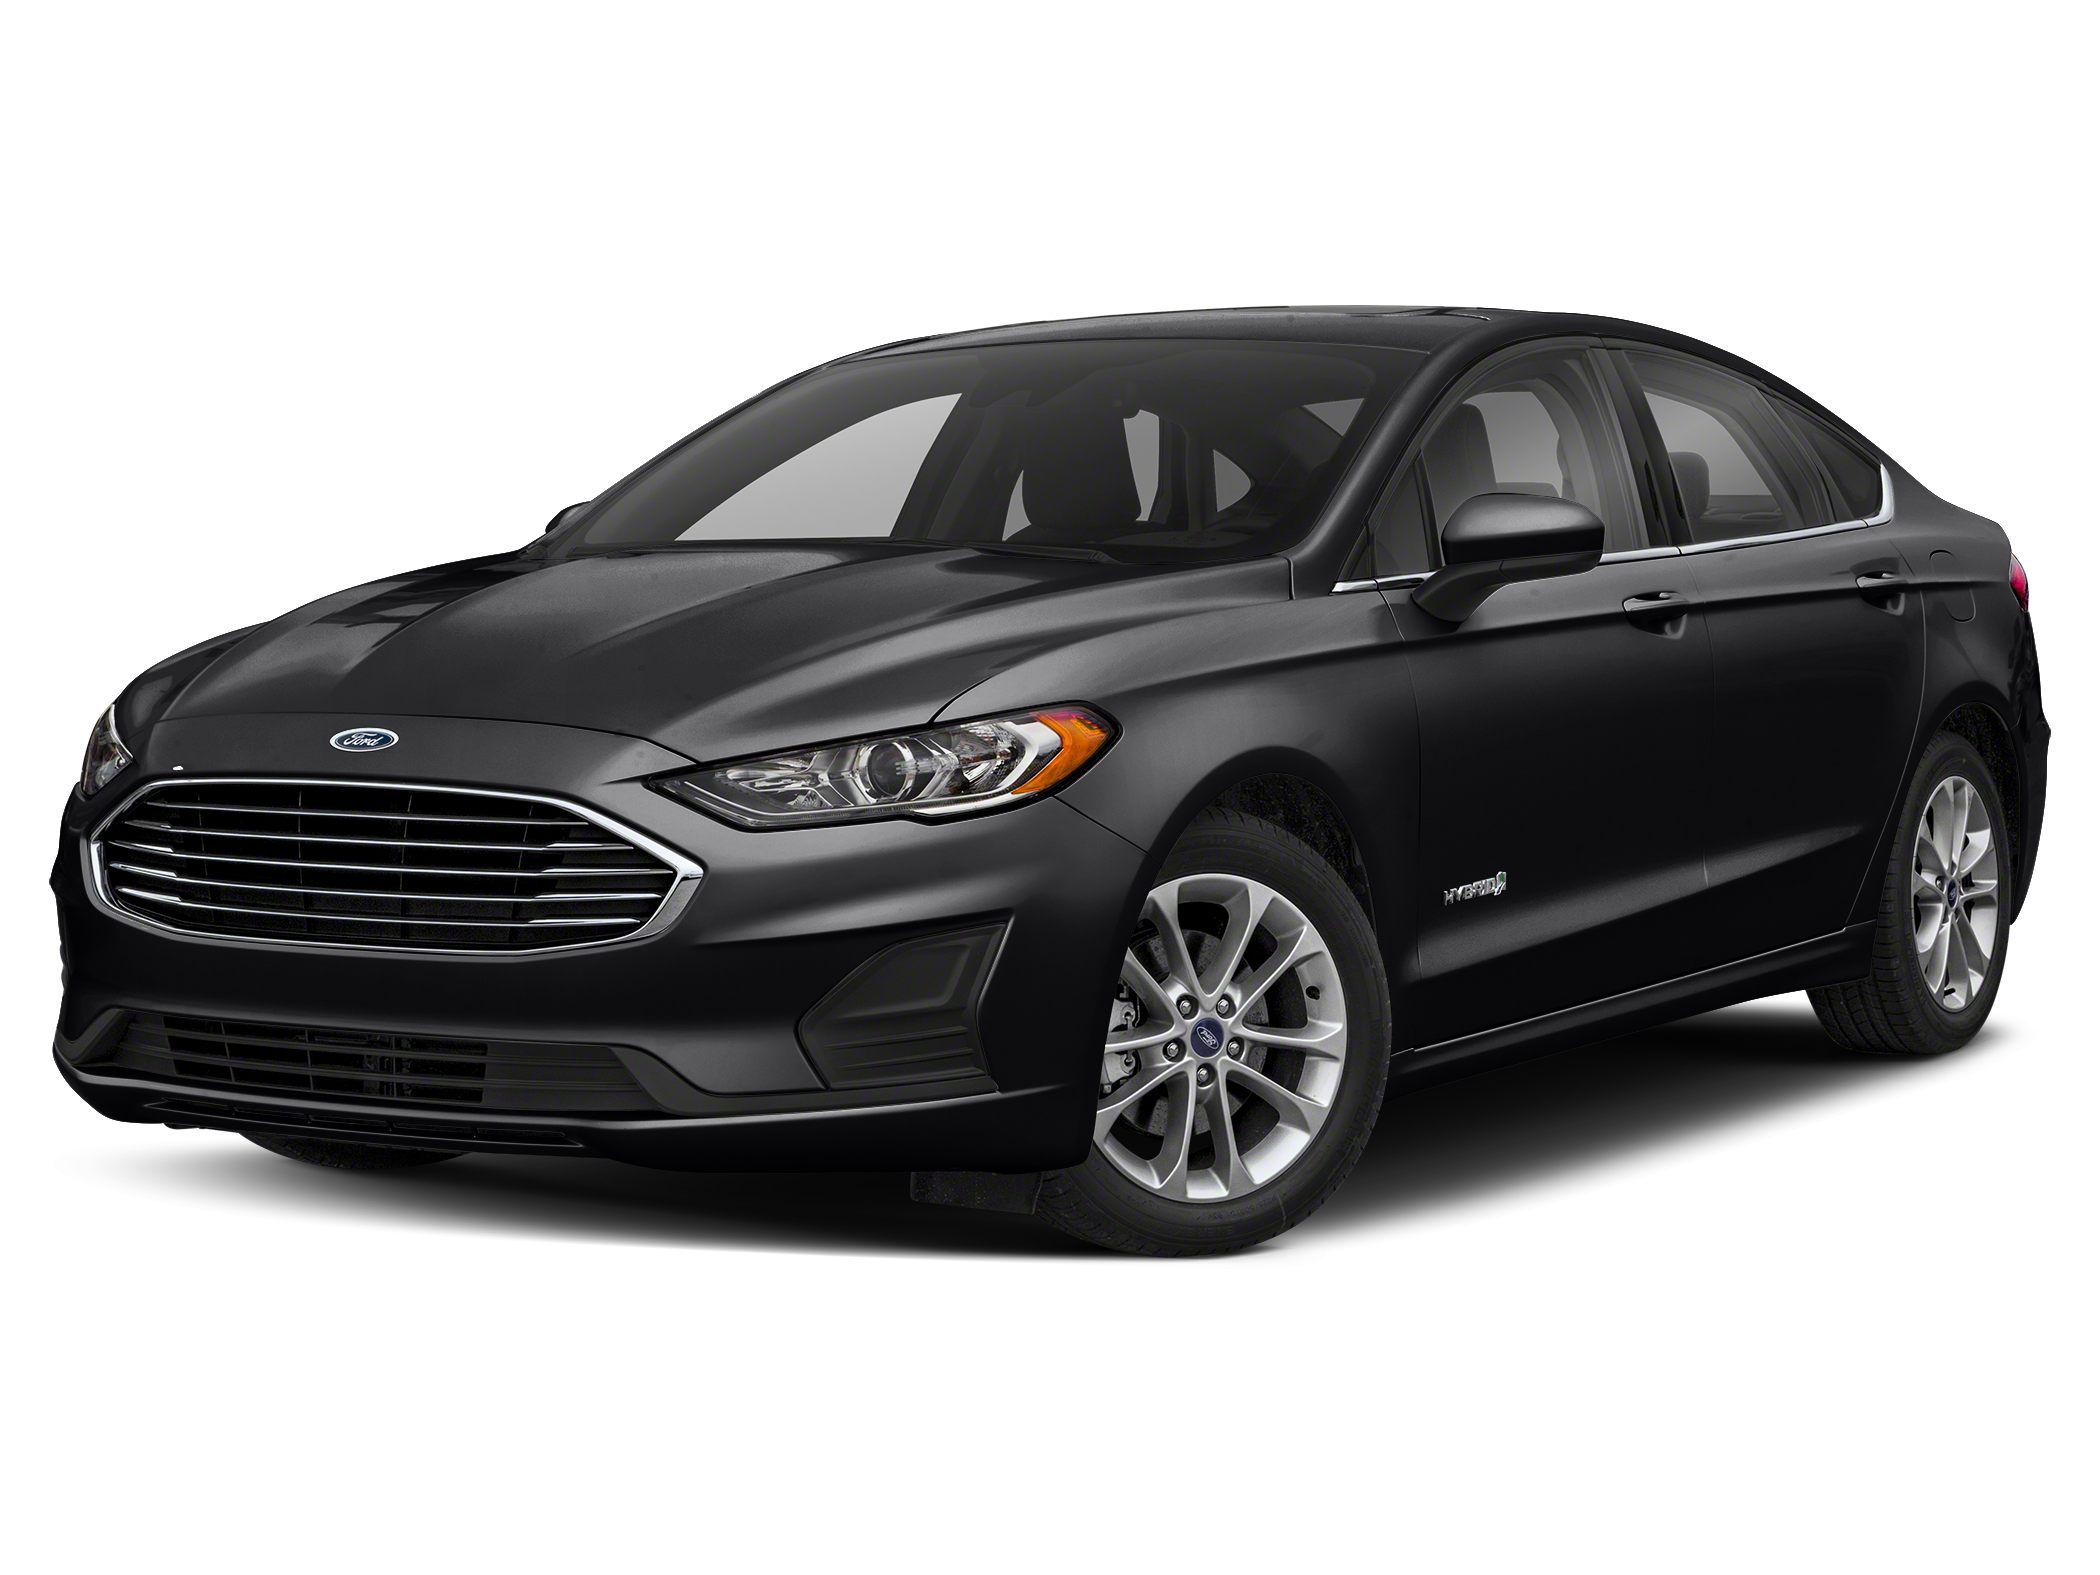 Used 2019 Ford Fusion Hybrid For Sale at Future Chevrolet | VIN:  3FA6P0RU4KR202084